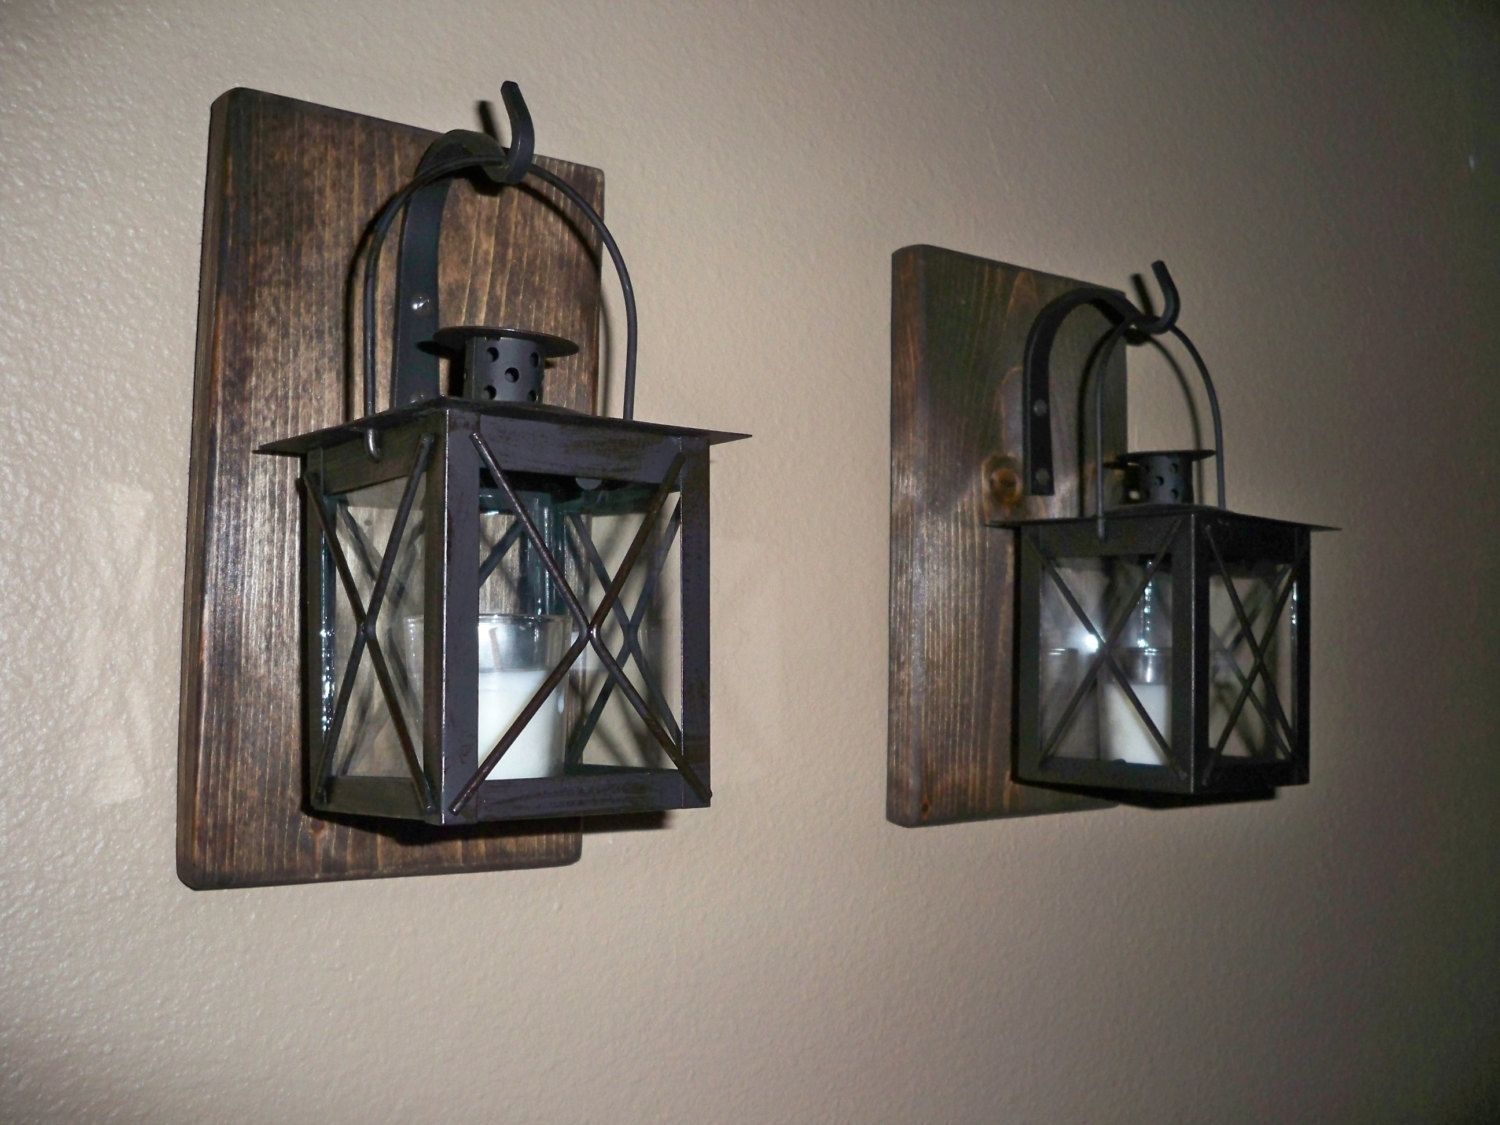 Decorative Outdoor Wall Art Large Wrought Iron Key Decor Sconces Intended For Etsy Outdoor Lanterns (View 8 of 20)